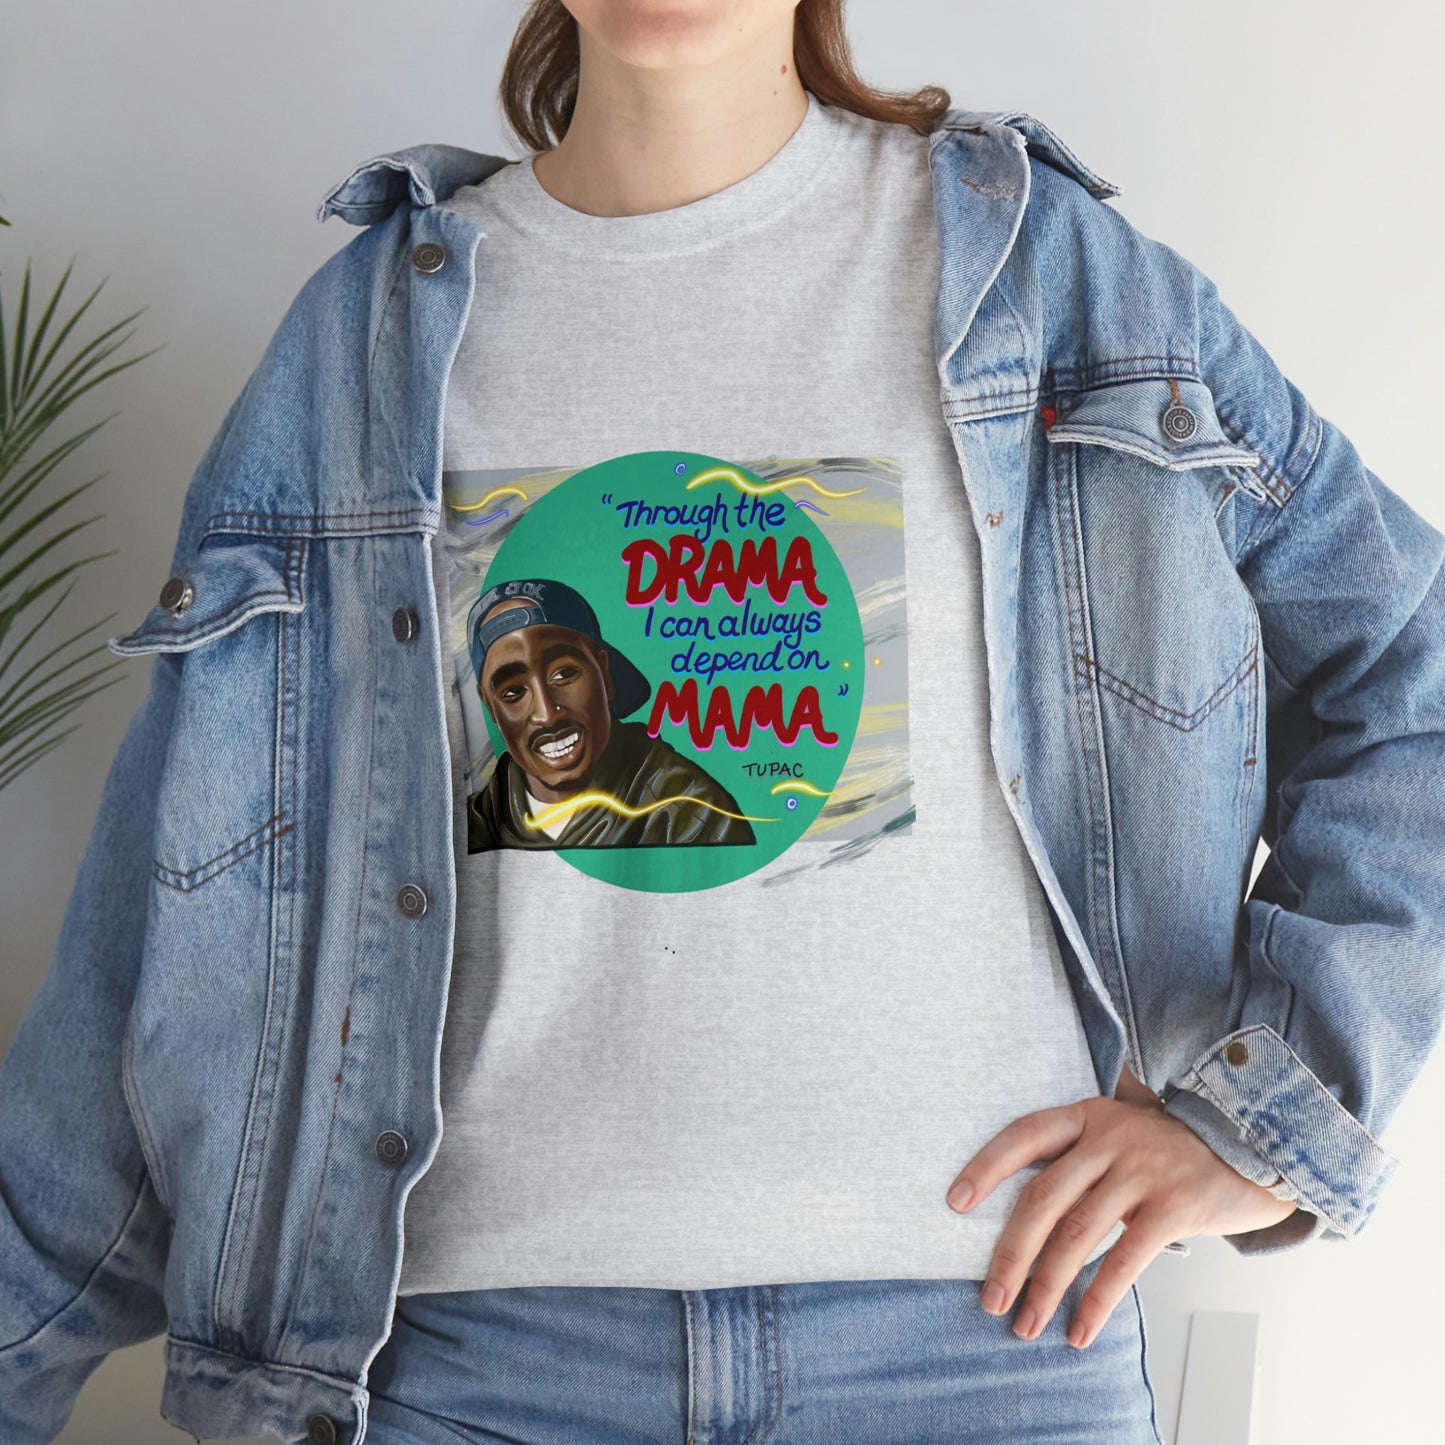 Famous quote from Tupac on Always depending on Mama Tee